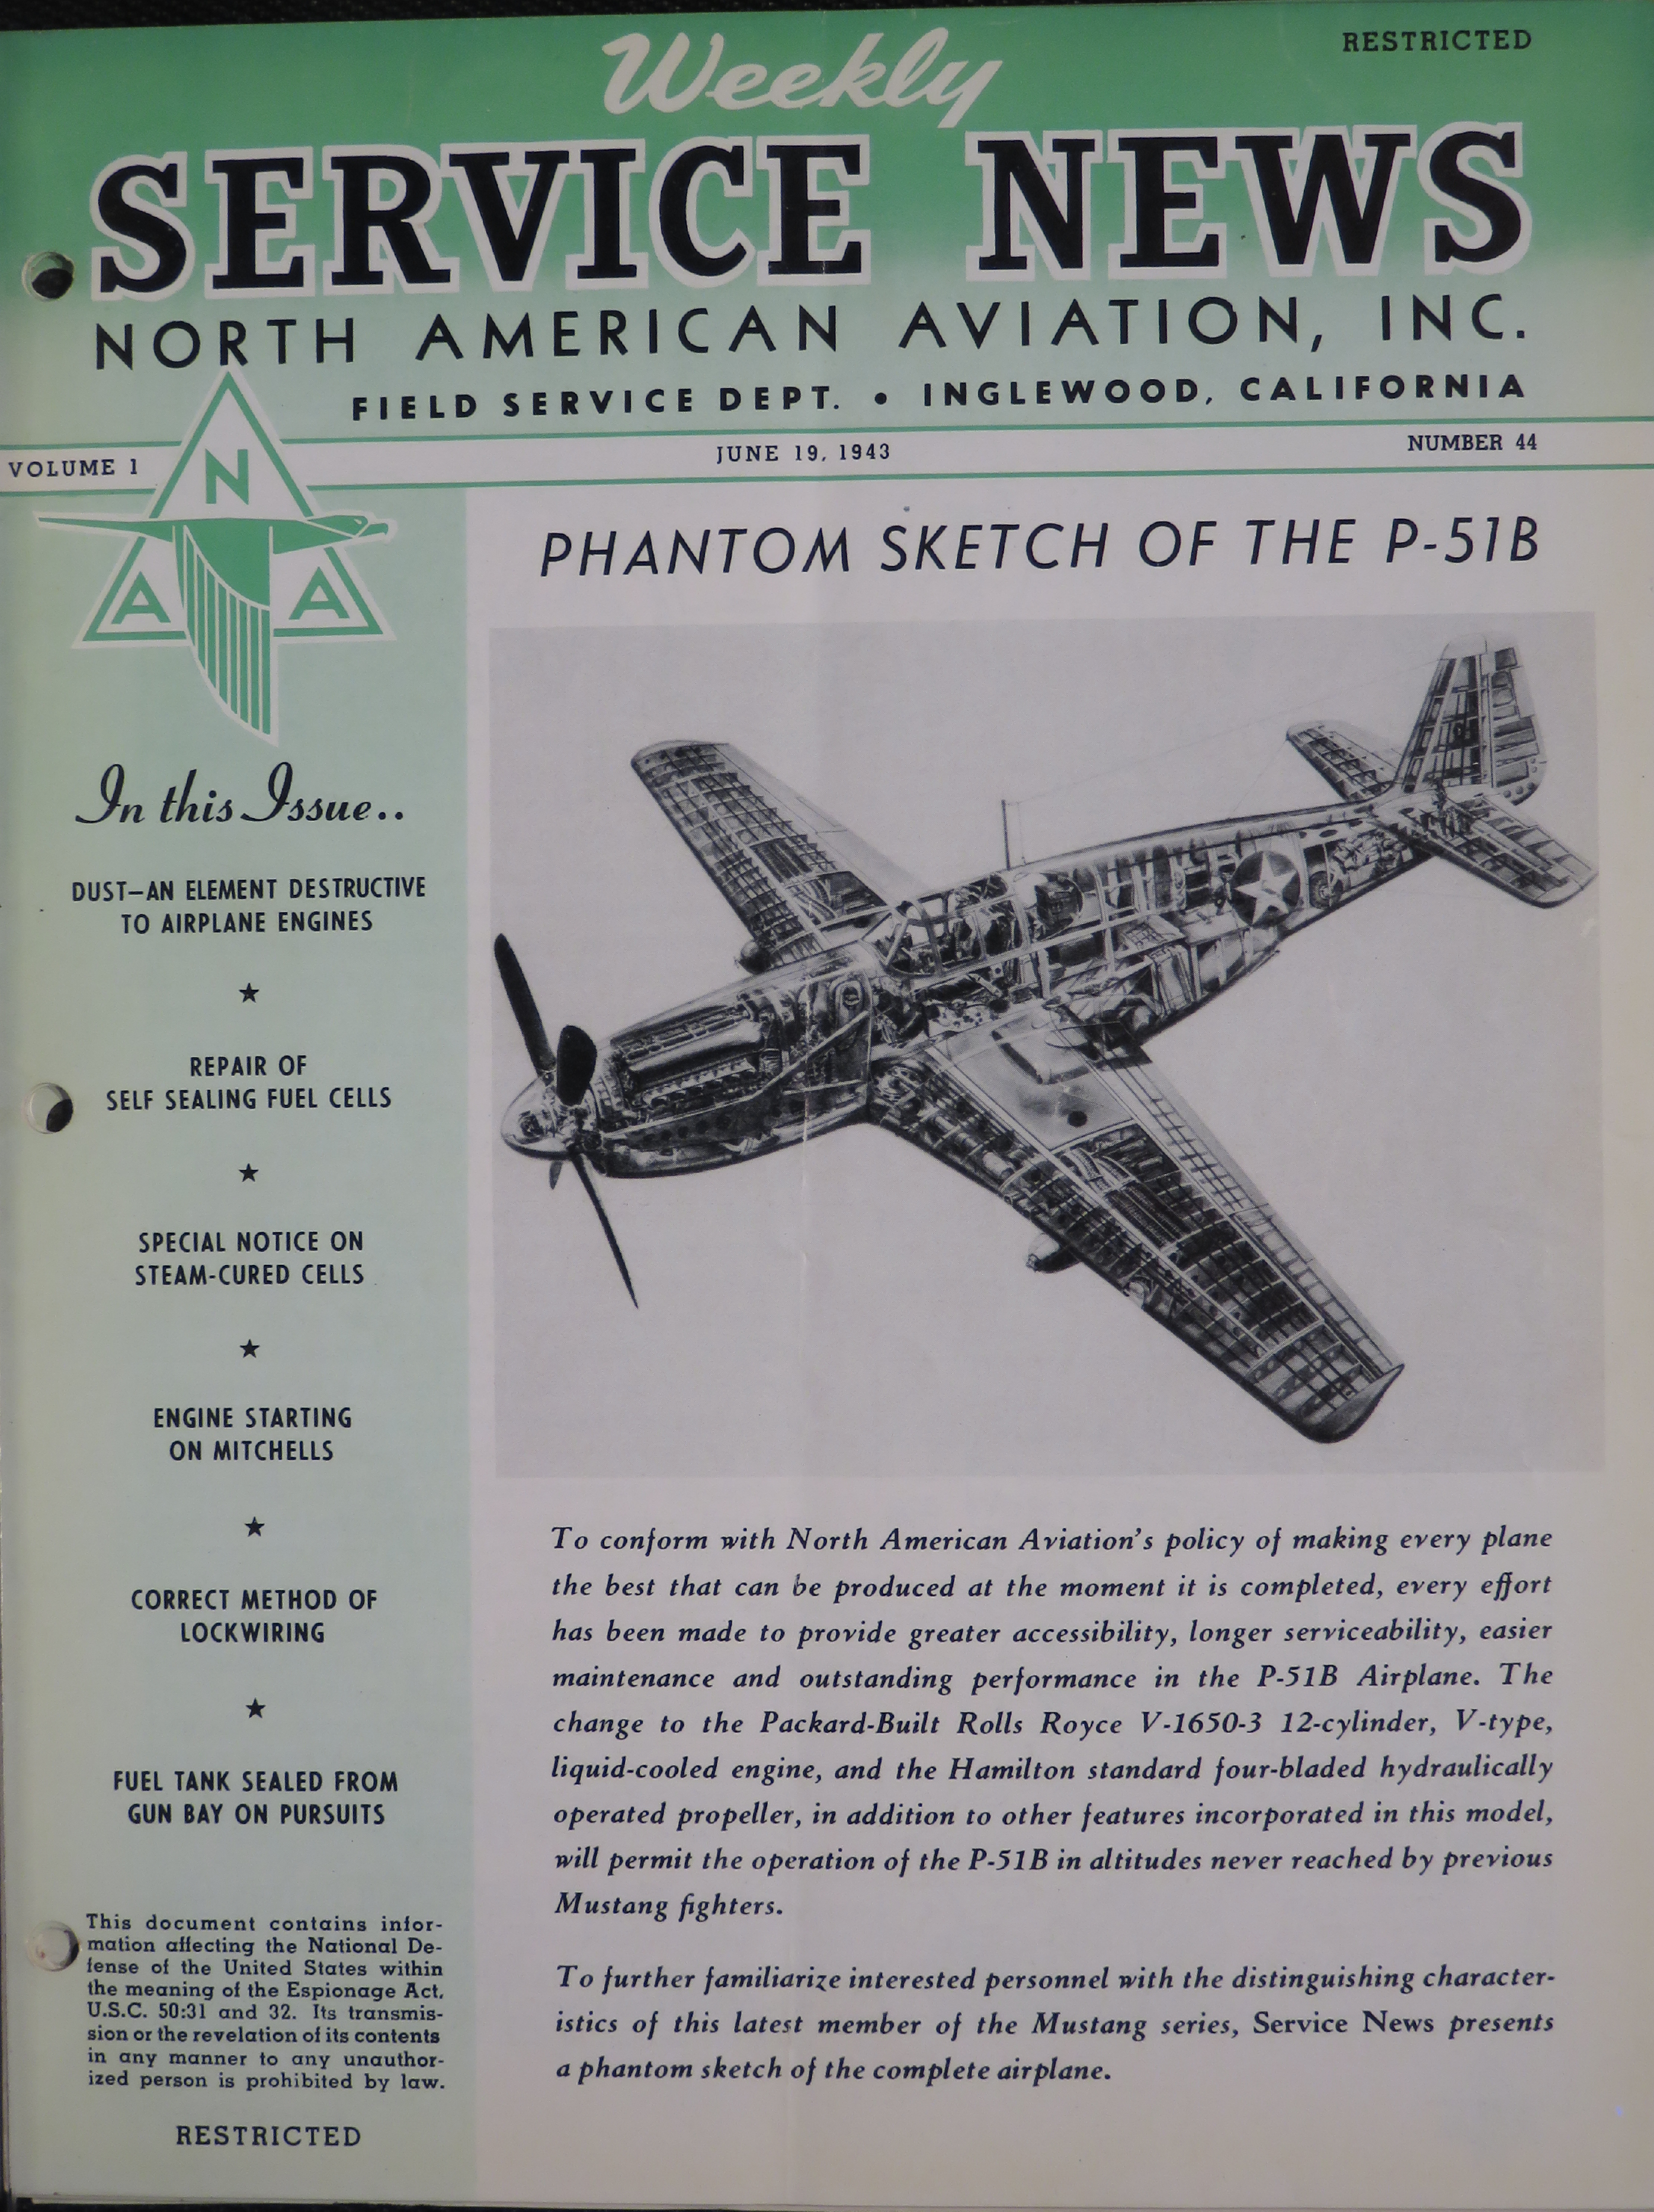 Sample page 1 from AirCorps Library document: Volume 1, No. 44 - Weekly Service News